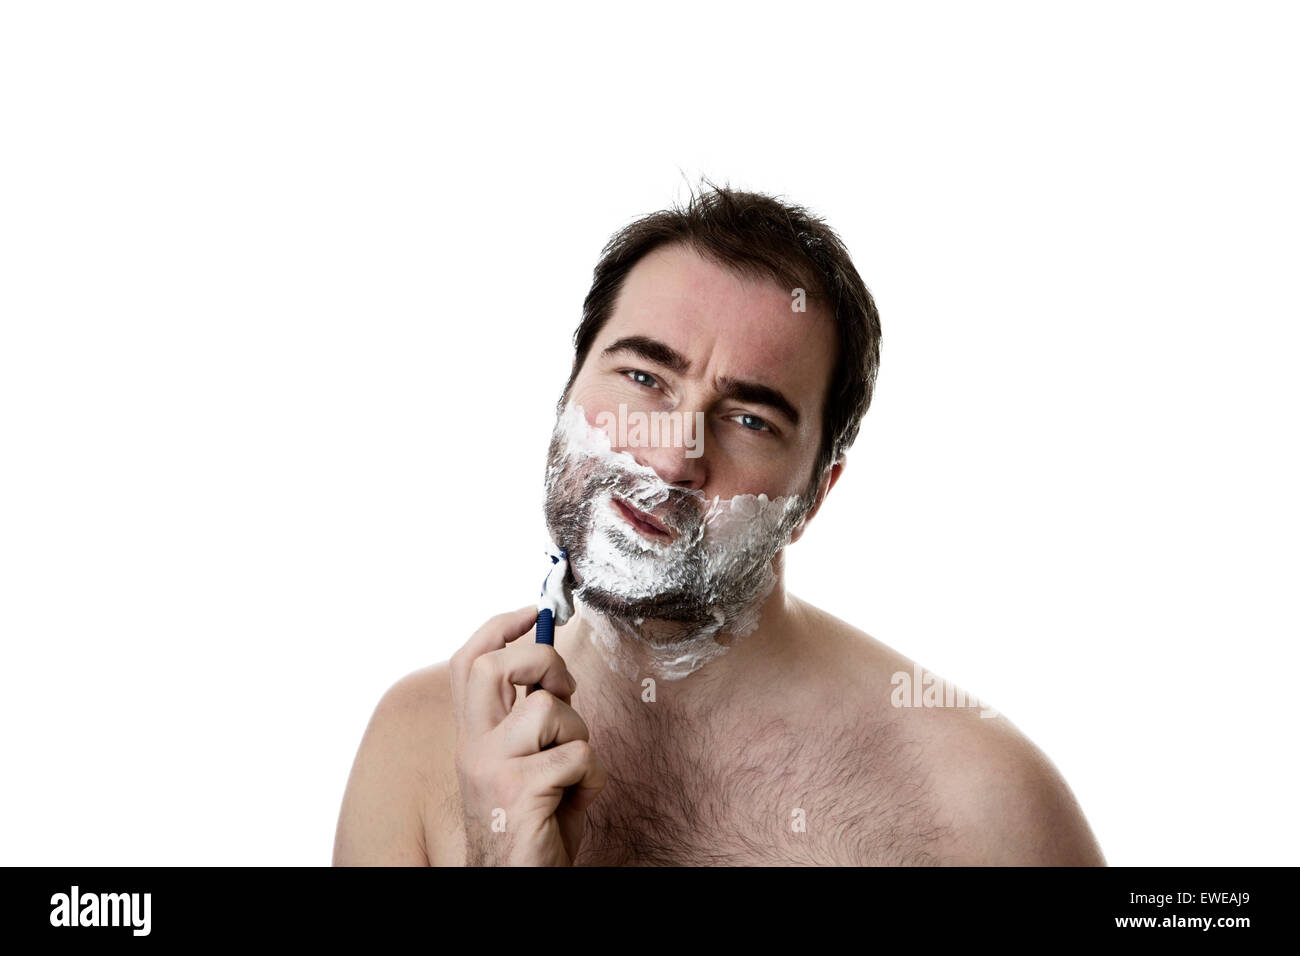 man shaving two week of facial hair growth of his face Stock Photo - Alamy